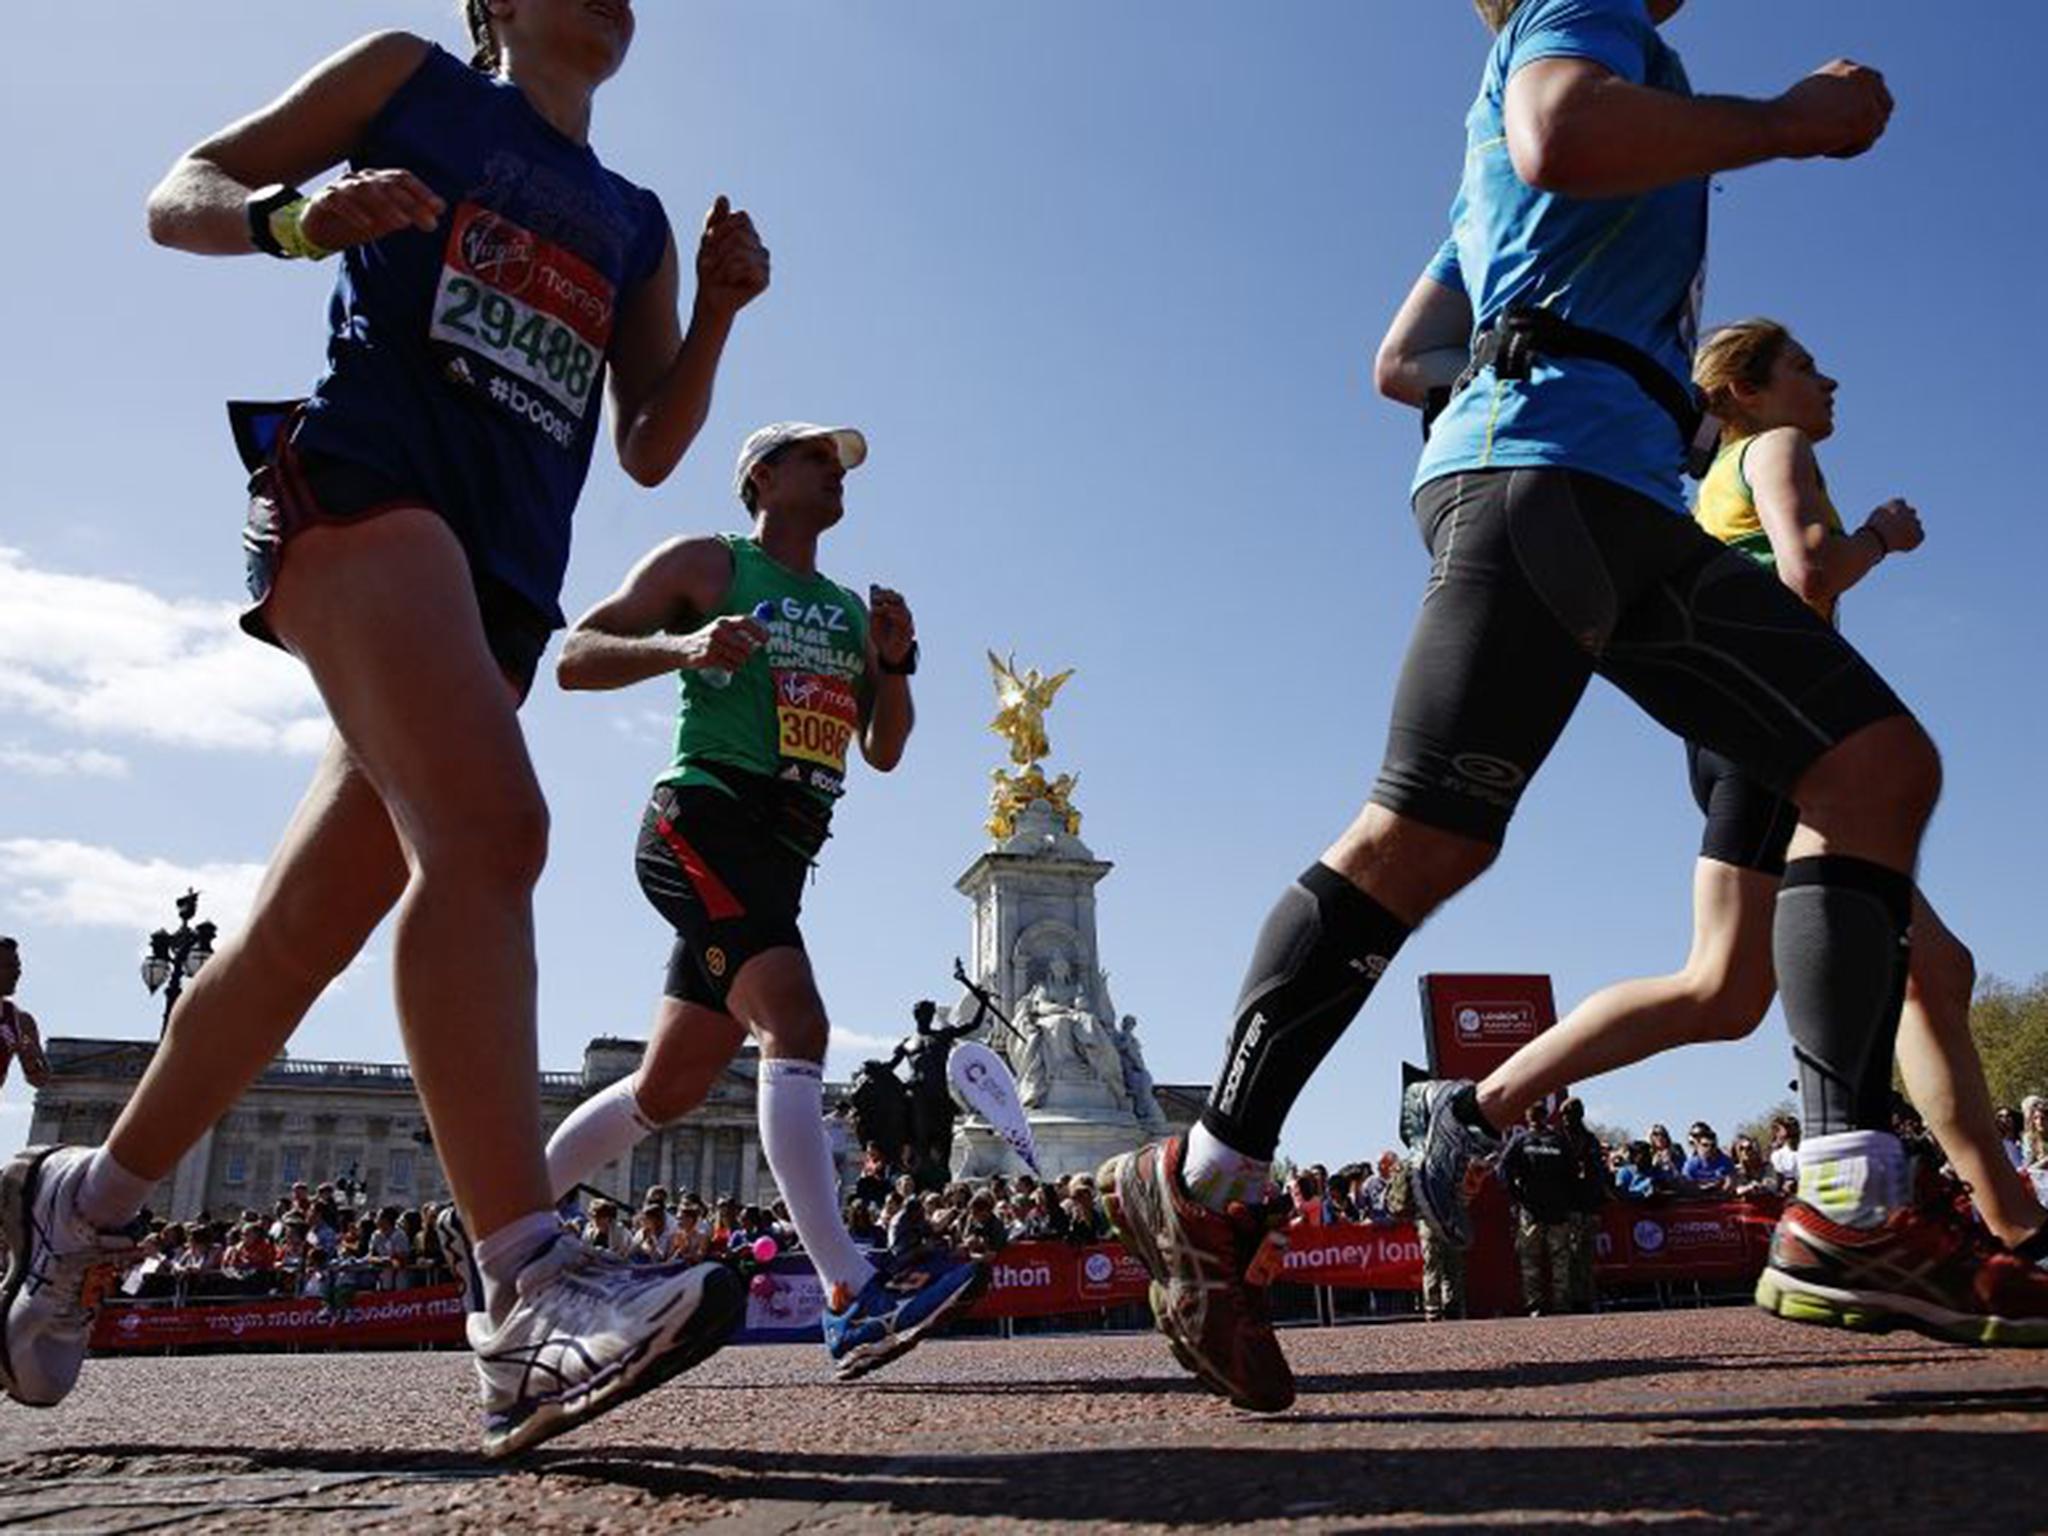 The fastest amateur runners were from Iceland